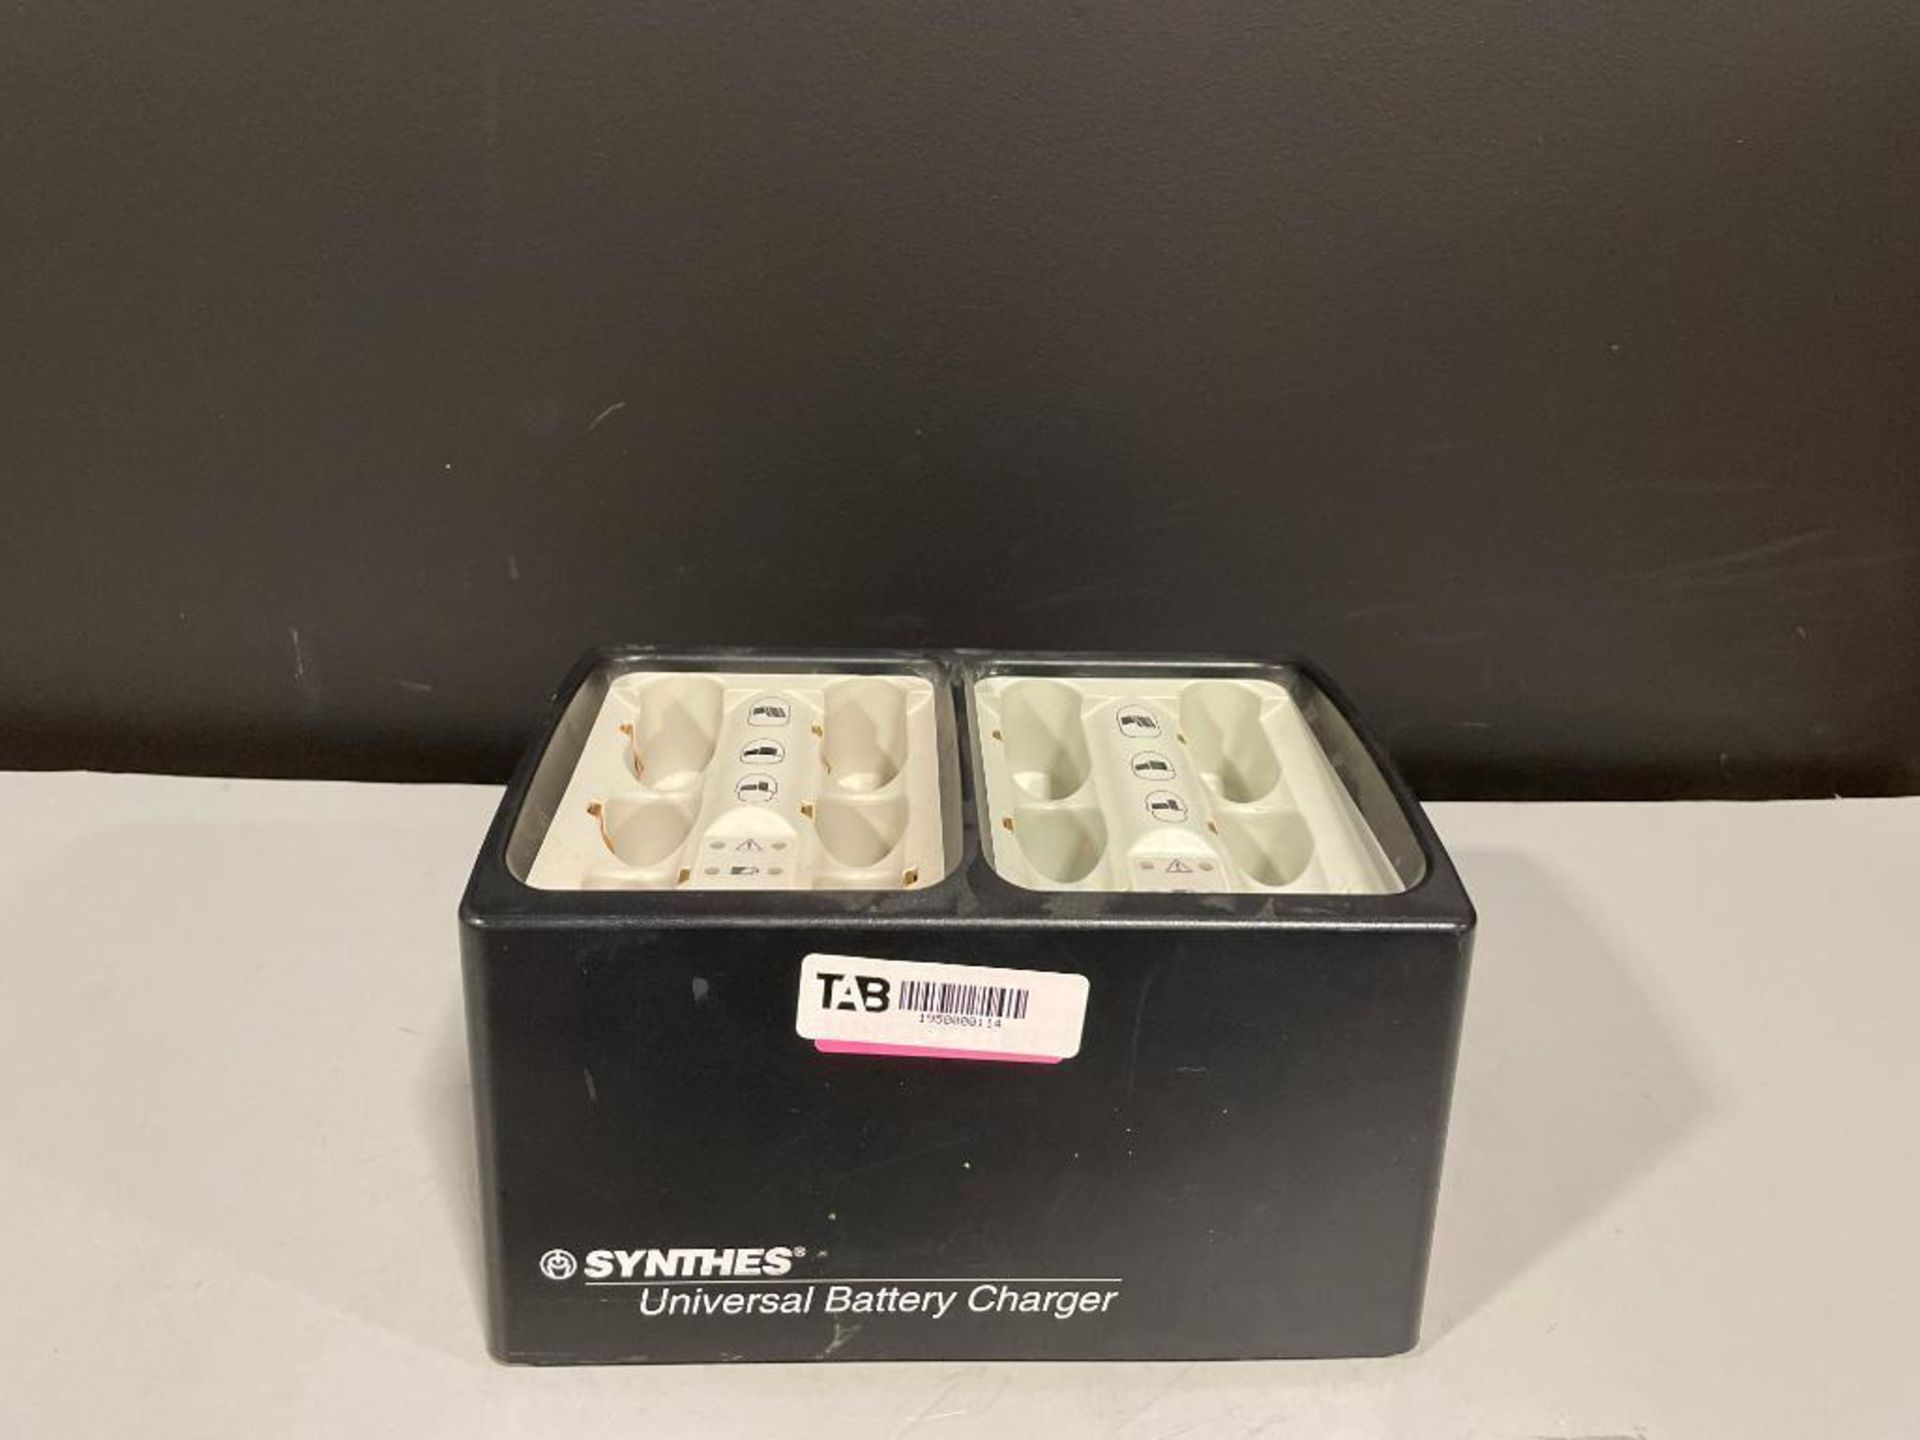 SYNTHES UNIVERSAL BATTERY CHARGER